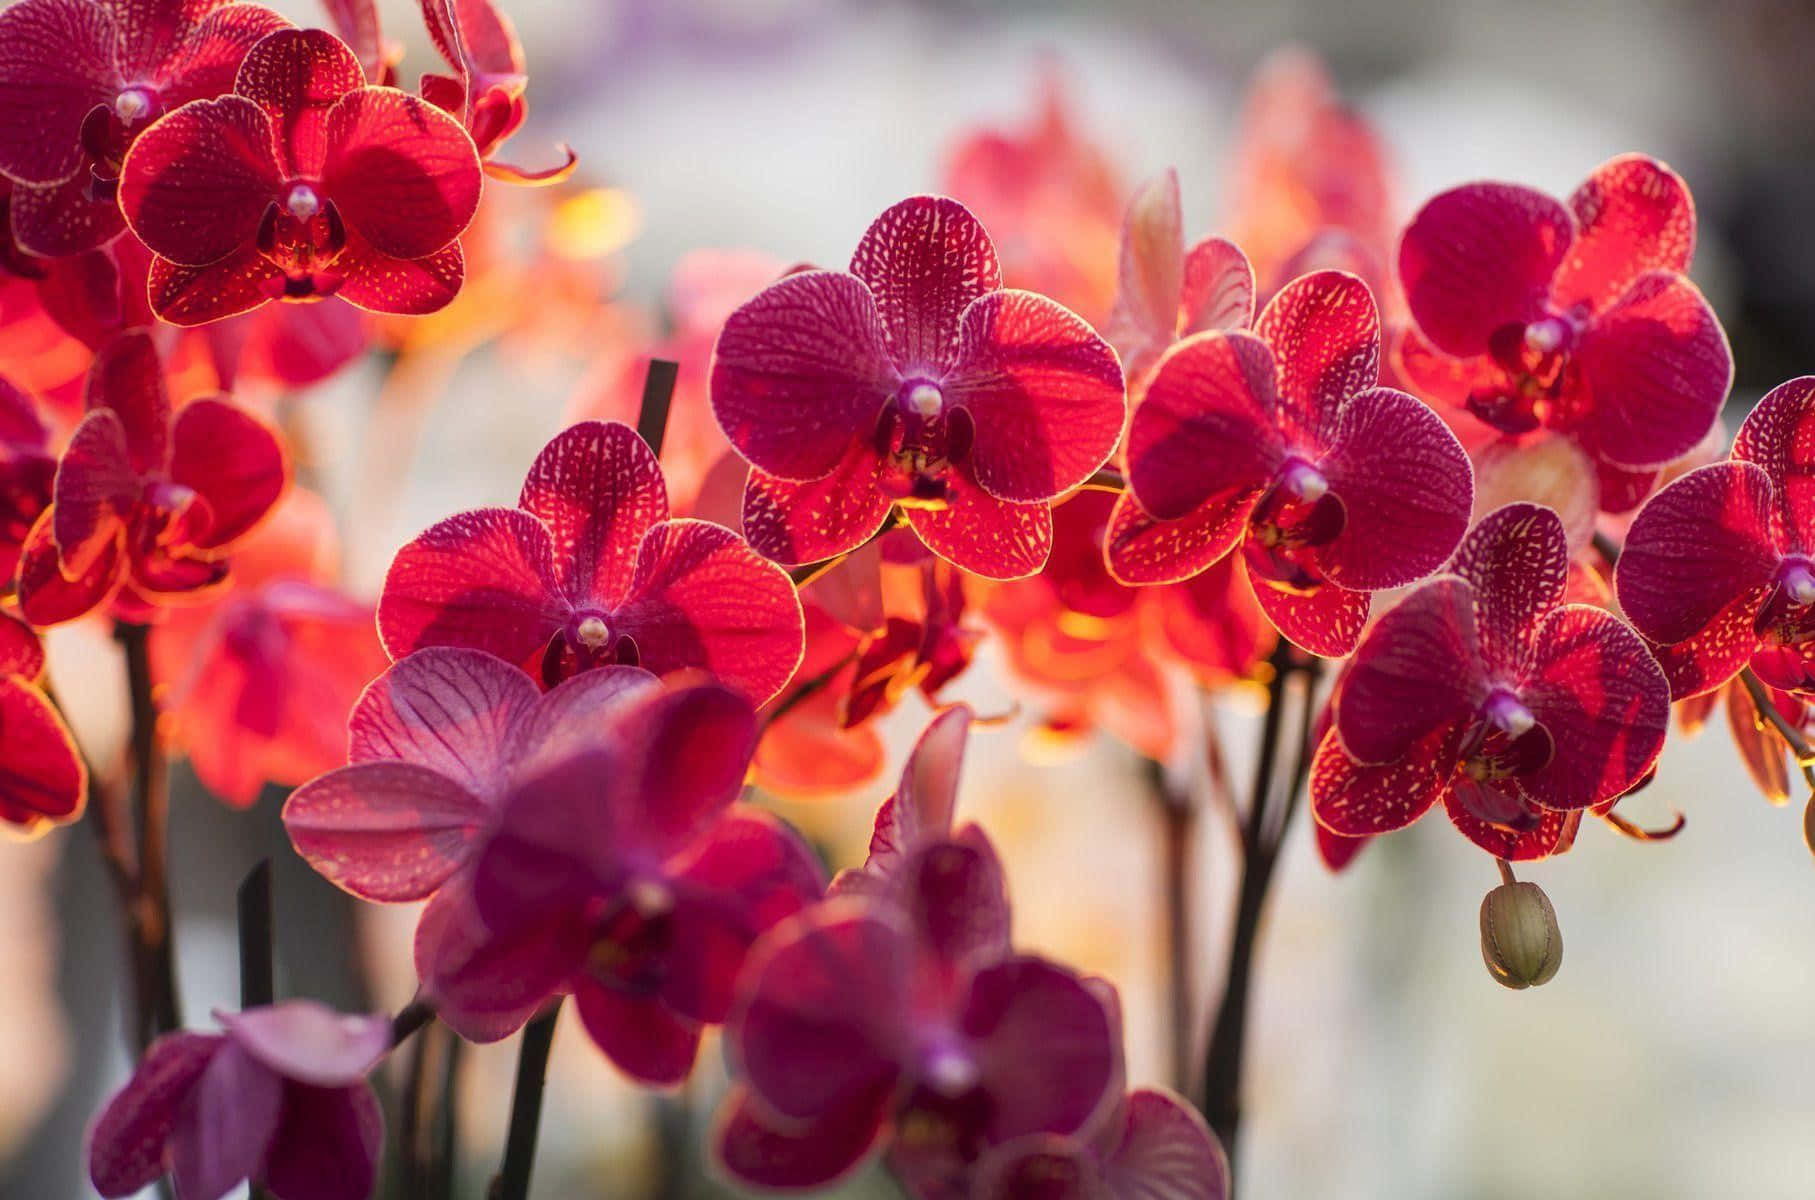 "The Exotic Beauty of Orchids"